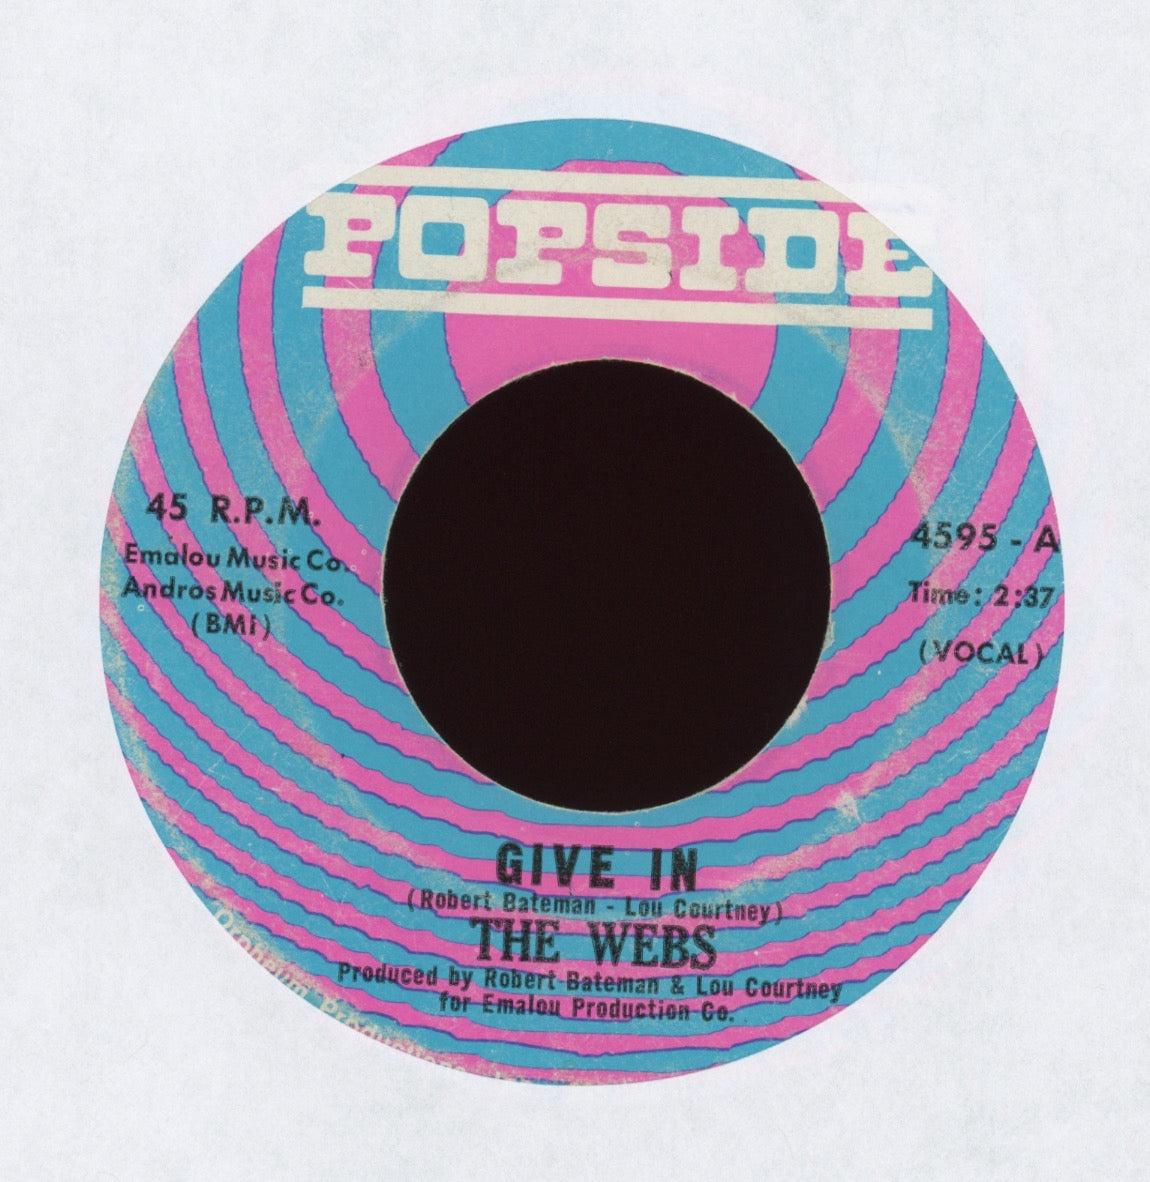 The Webs - Give In on Popside Northern Soul 45